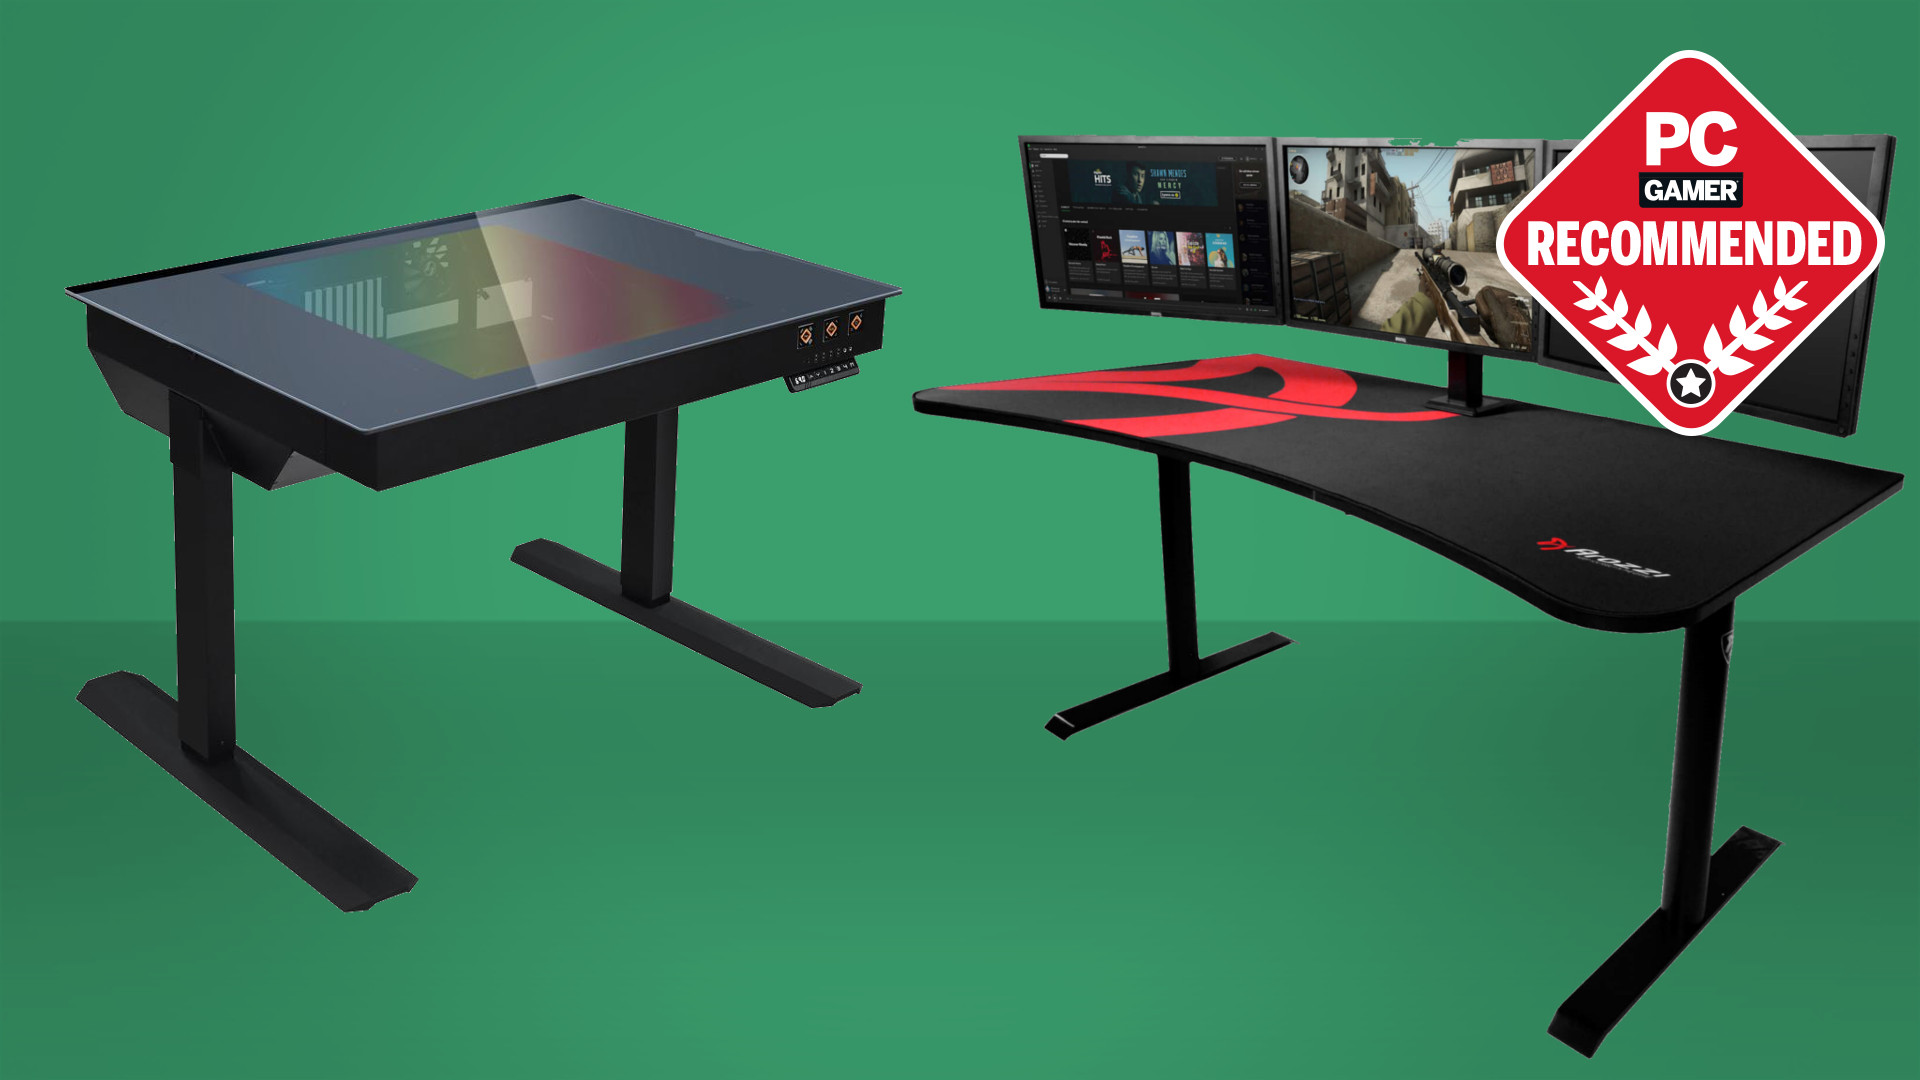 Best Gaming Desk In 2021 Pc Gamer, What Is A Good Desk Size